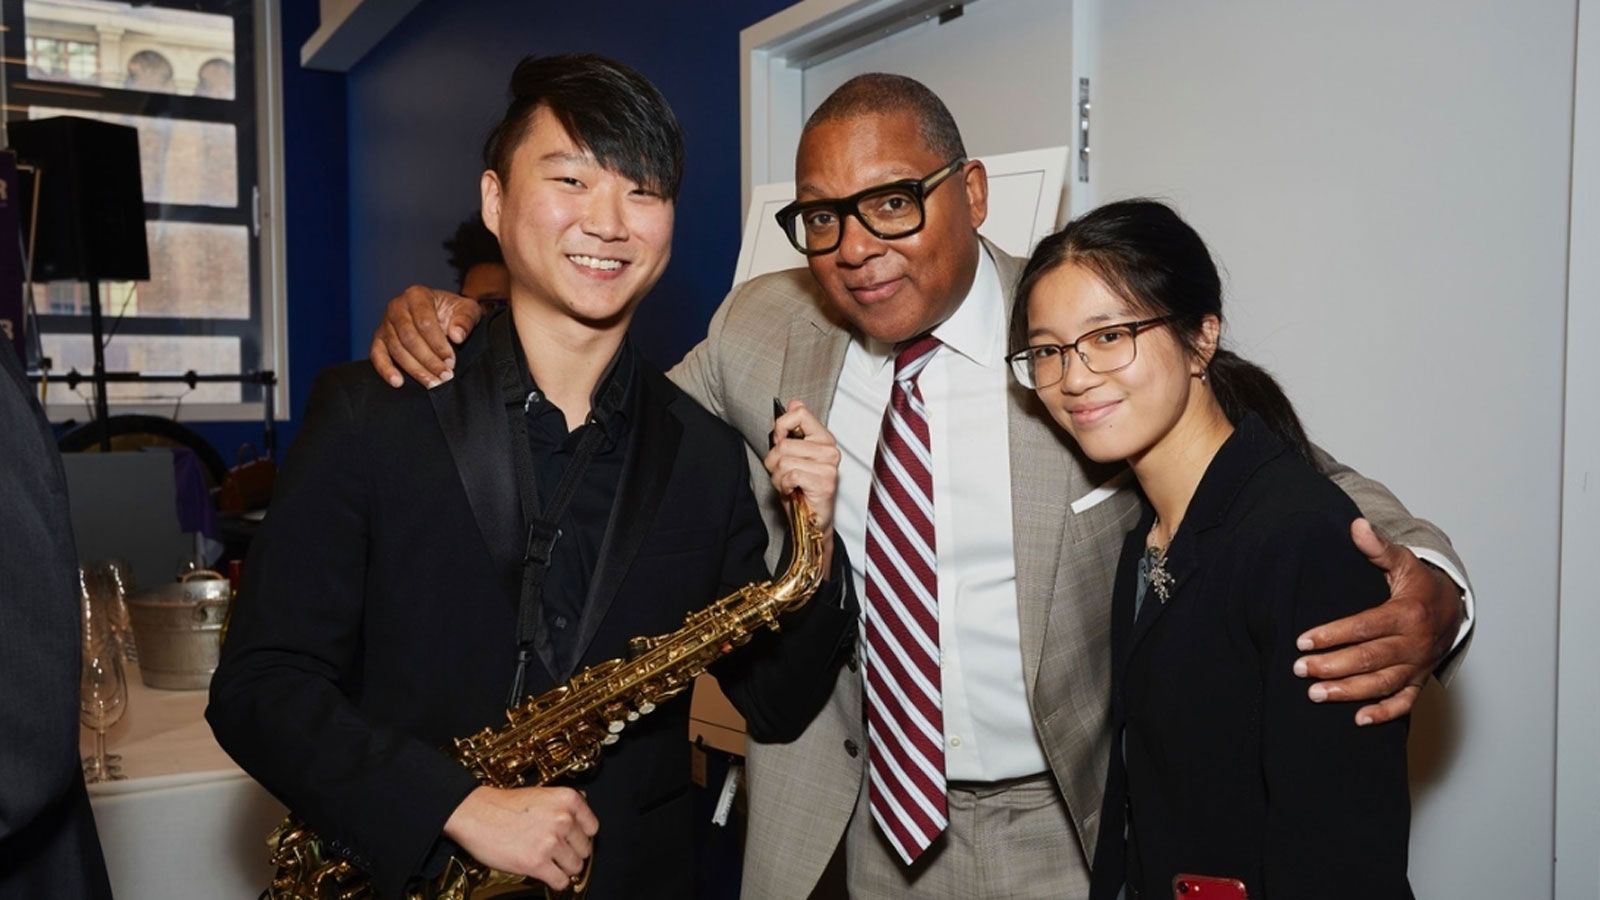 Hunter students Jacob Han (right) and Karen Xie (left) with the legendary Wynton Marsalis at the new Appel Rehearsal Hall.